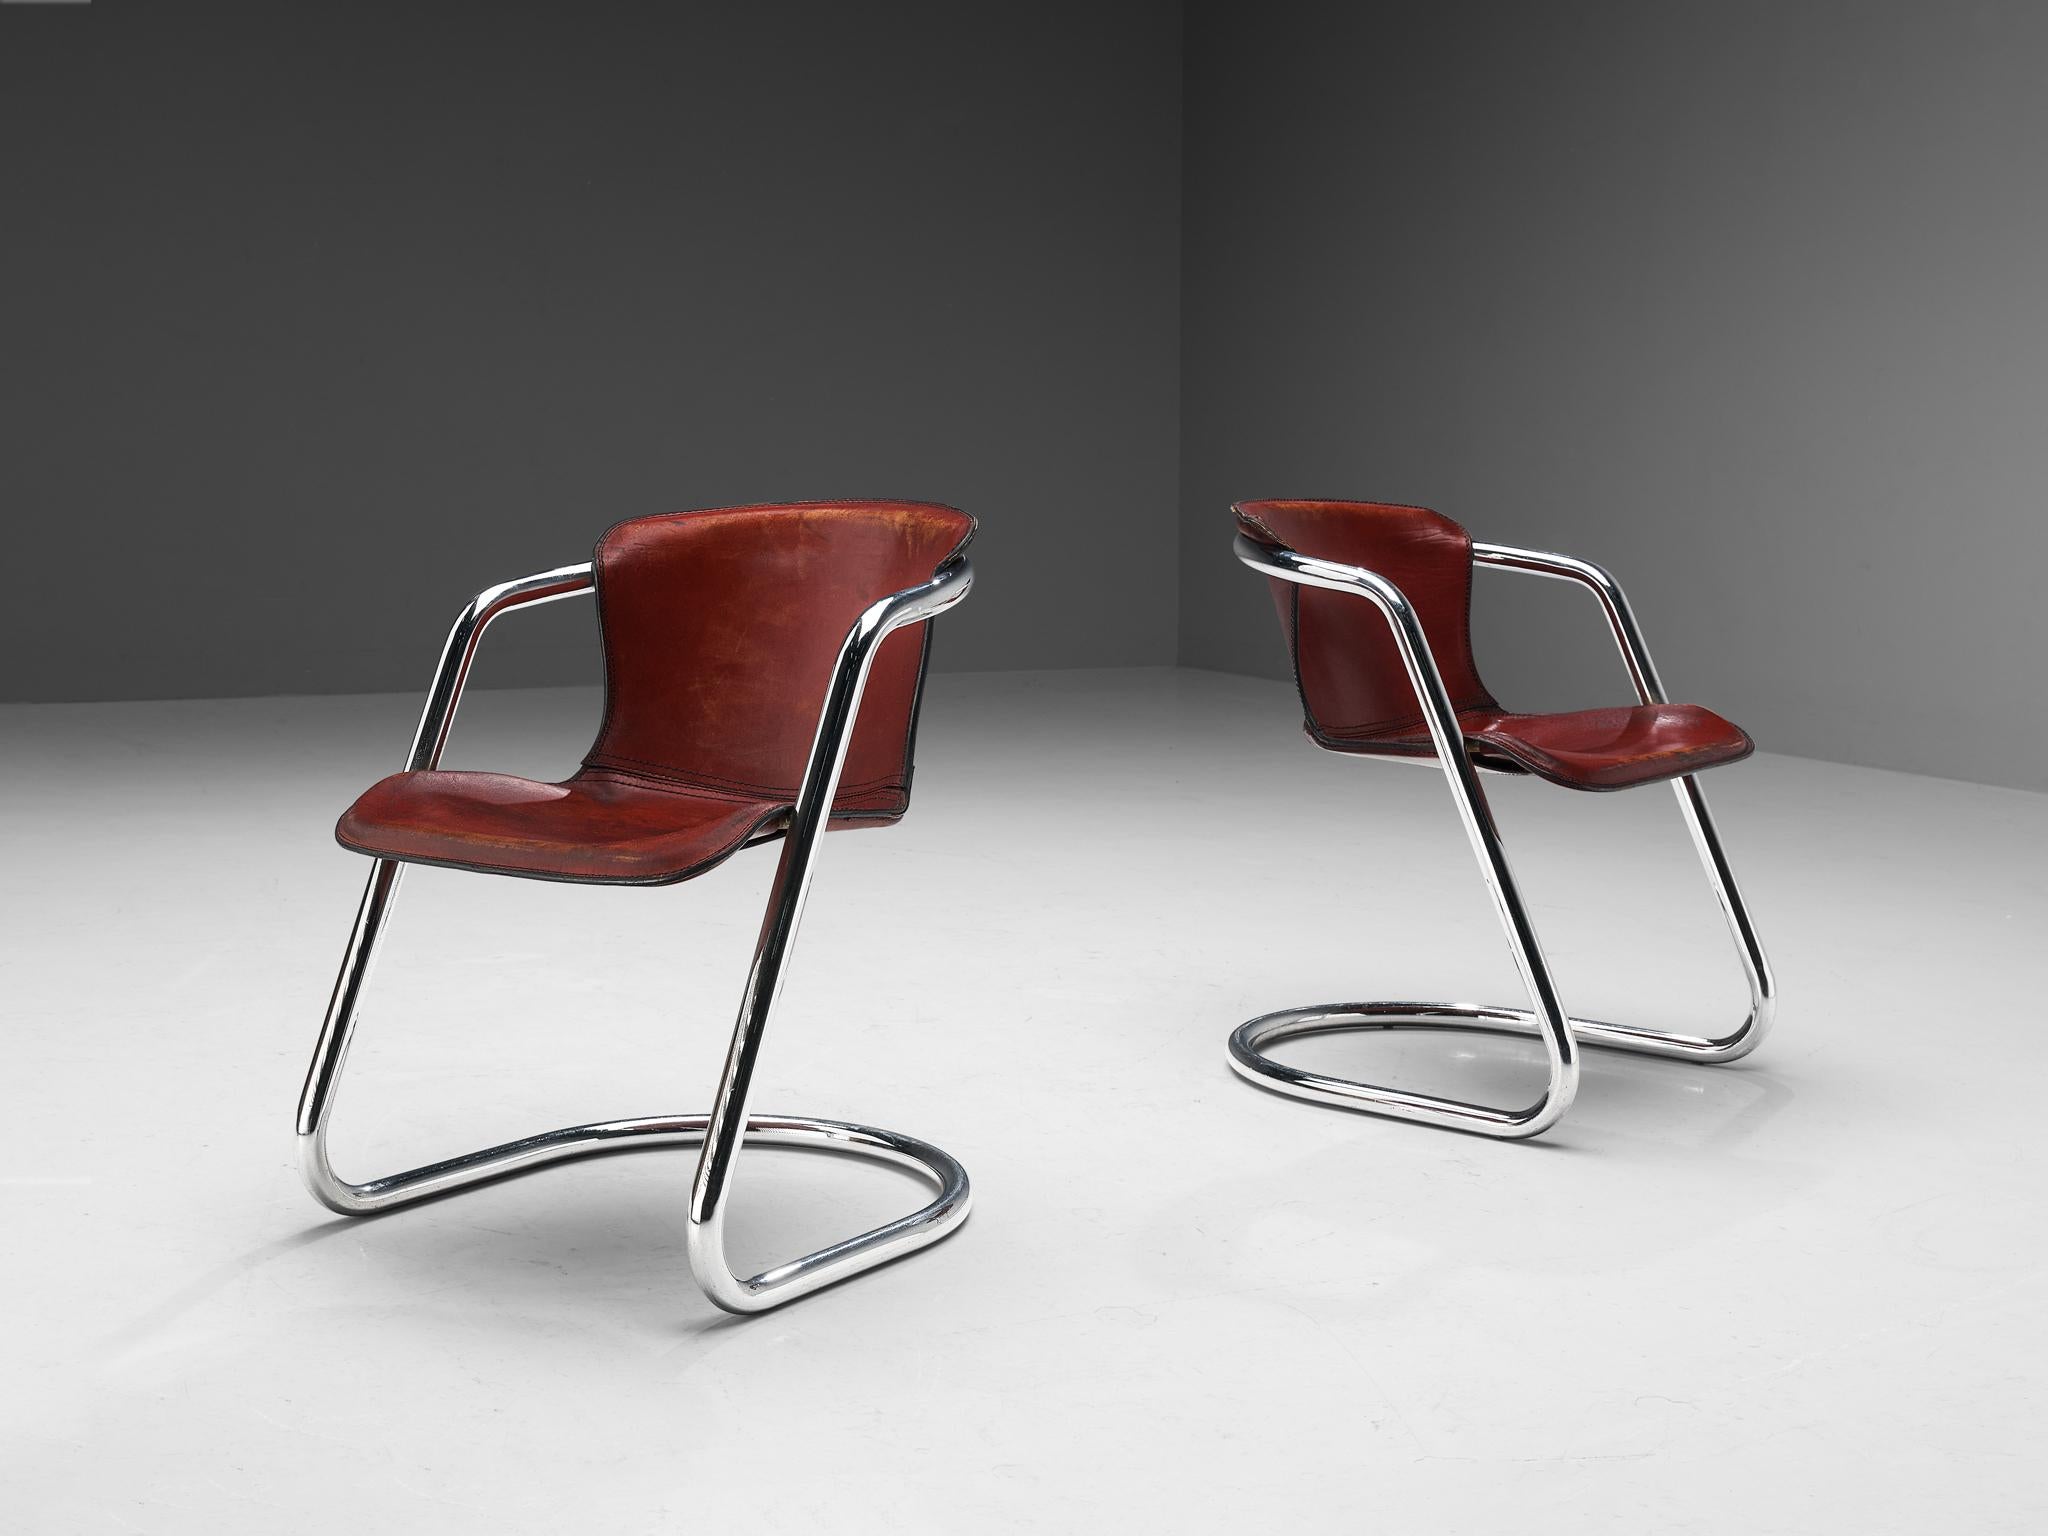 In the manner of Willy Rizzo, pair of armchairs, patinated saddle leather, chromed steel, Italy, 1970s.

This pair of armchairs is designed in the manner of Willy Rizzo and is pure and clear in its execution, giving the chair both a simple yet